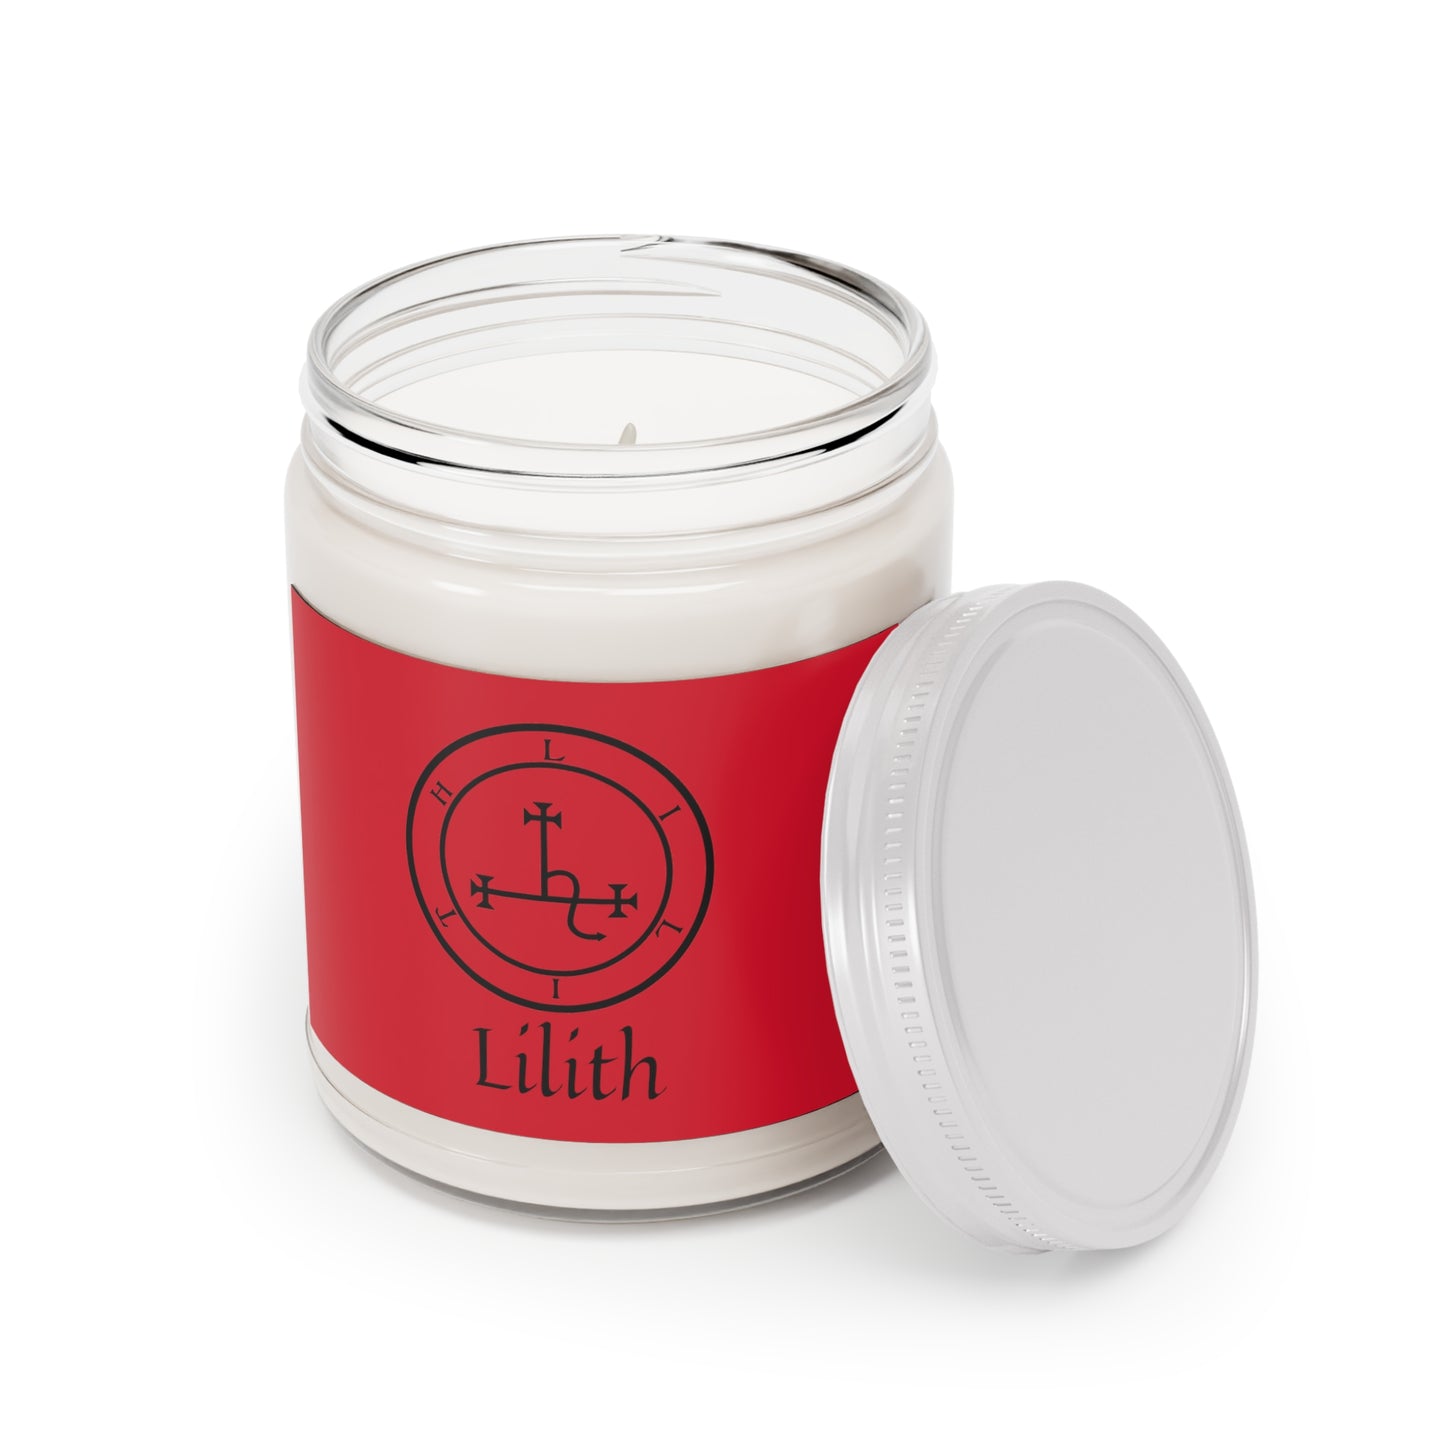 Lilith Sigil Scented Alar Candle